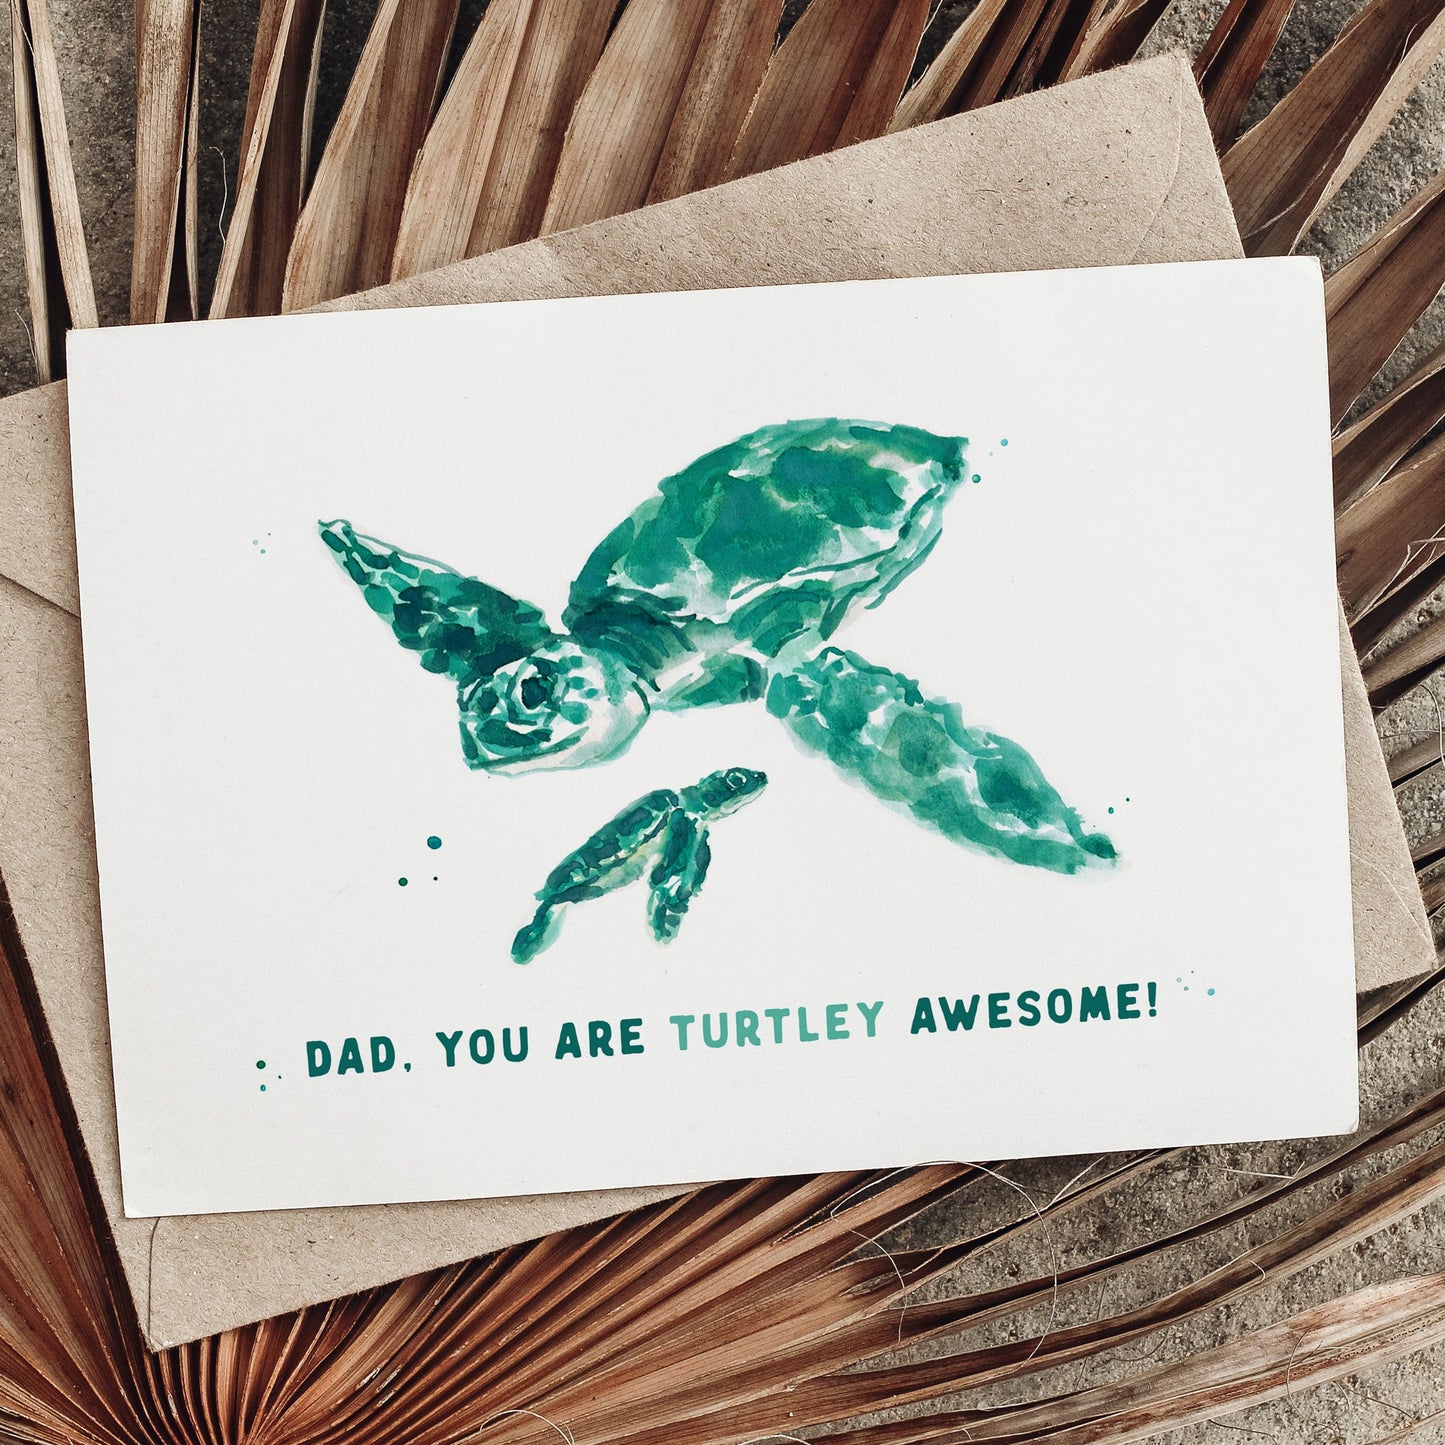 Turtley Awesome Dad Card - Turtle Father's Day Cards - Beach Themed Birthday Card for Dad - Moon Rock Prints